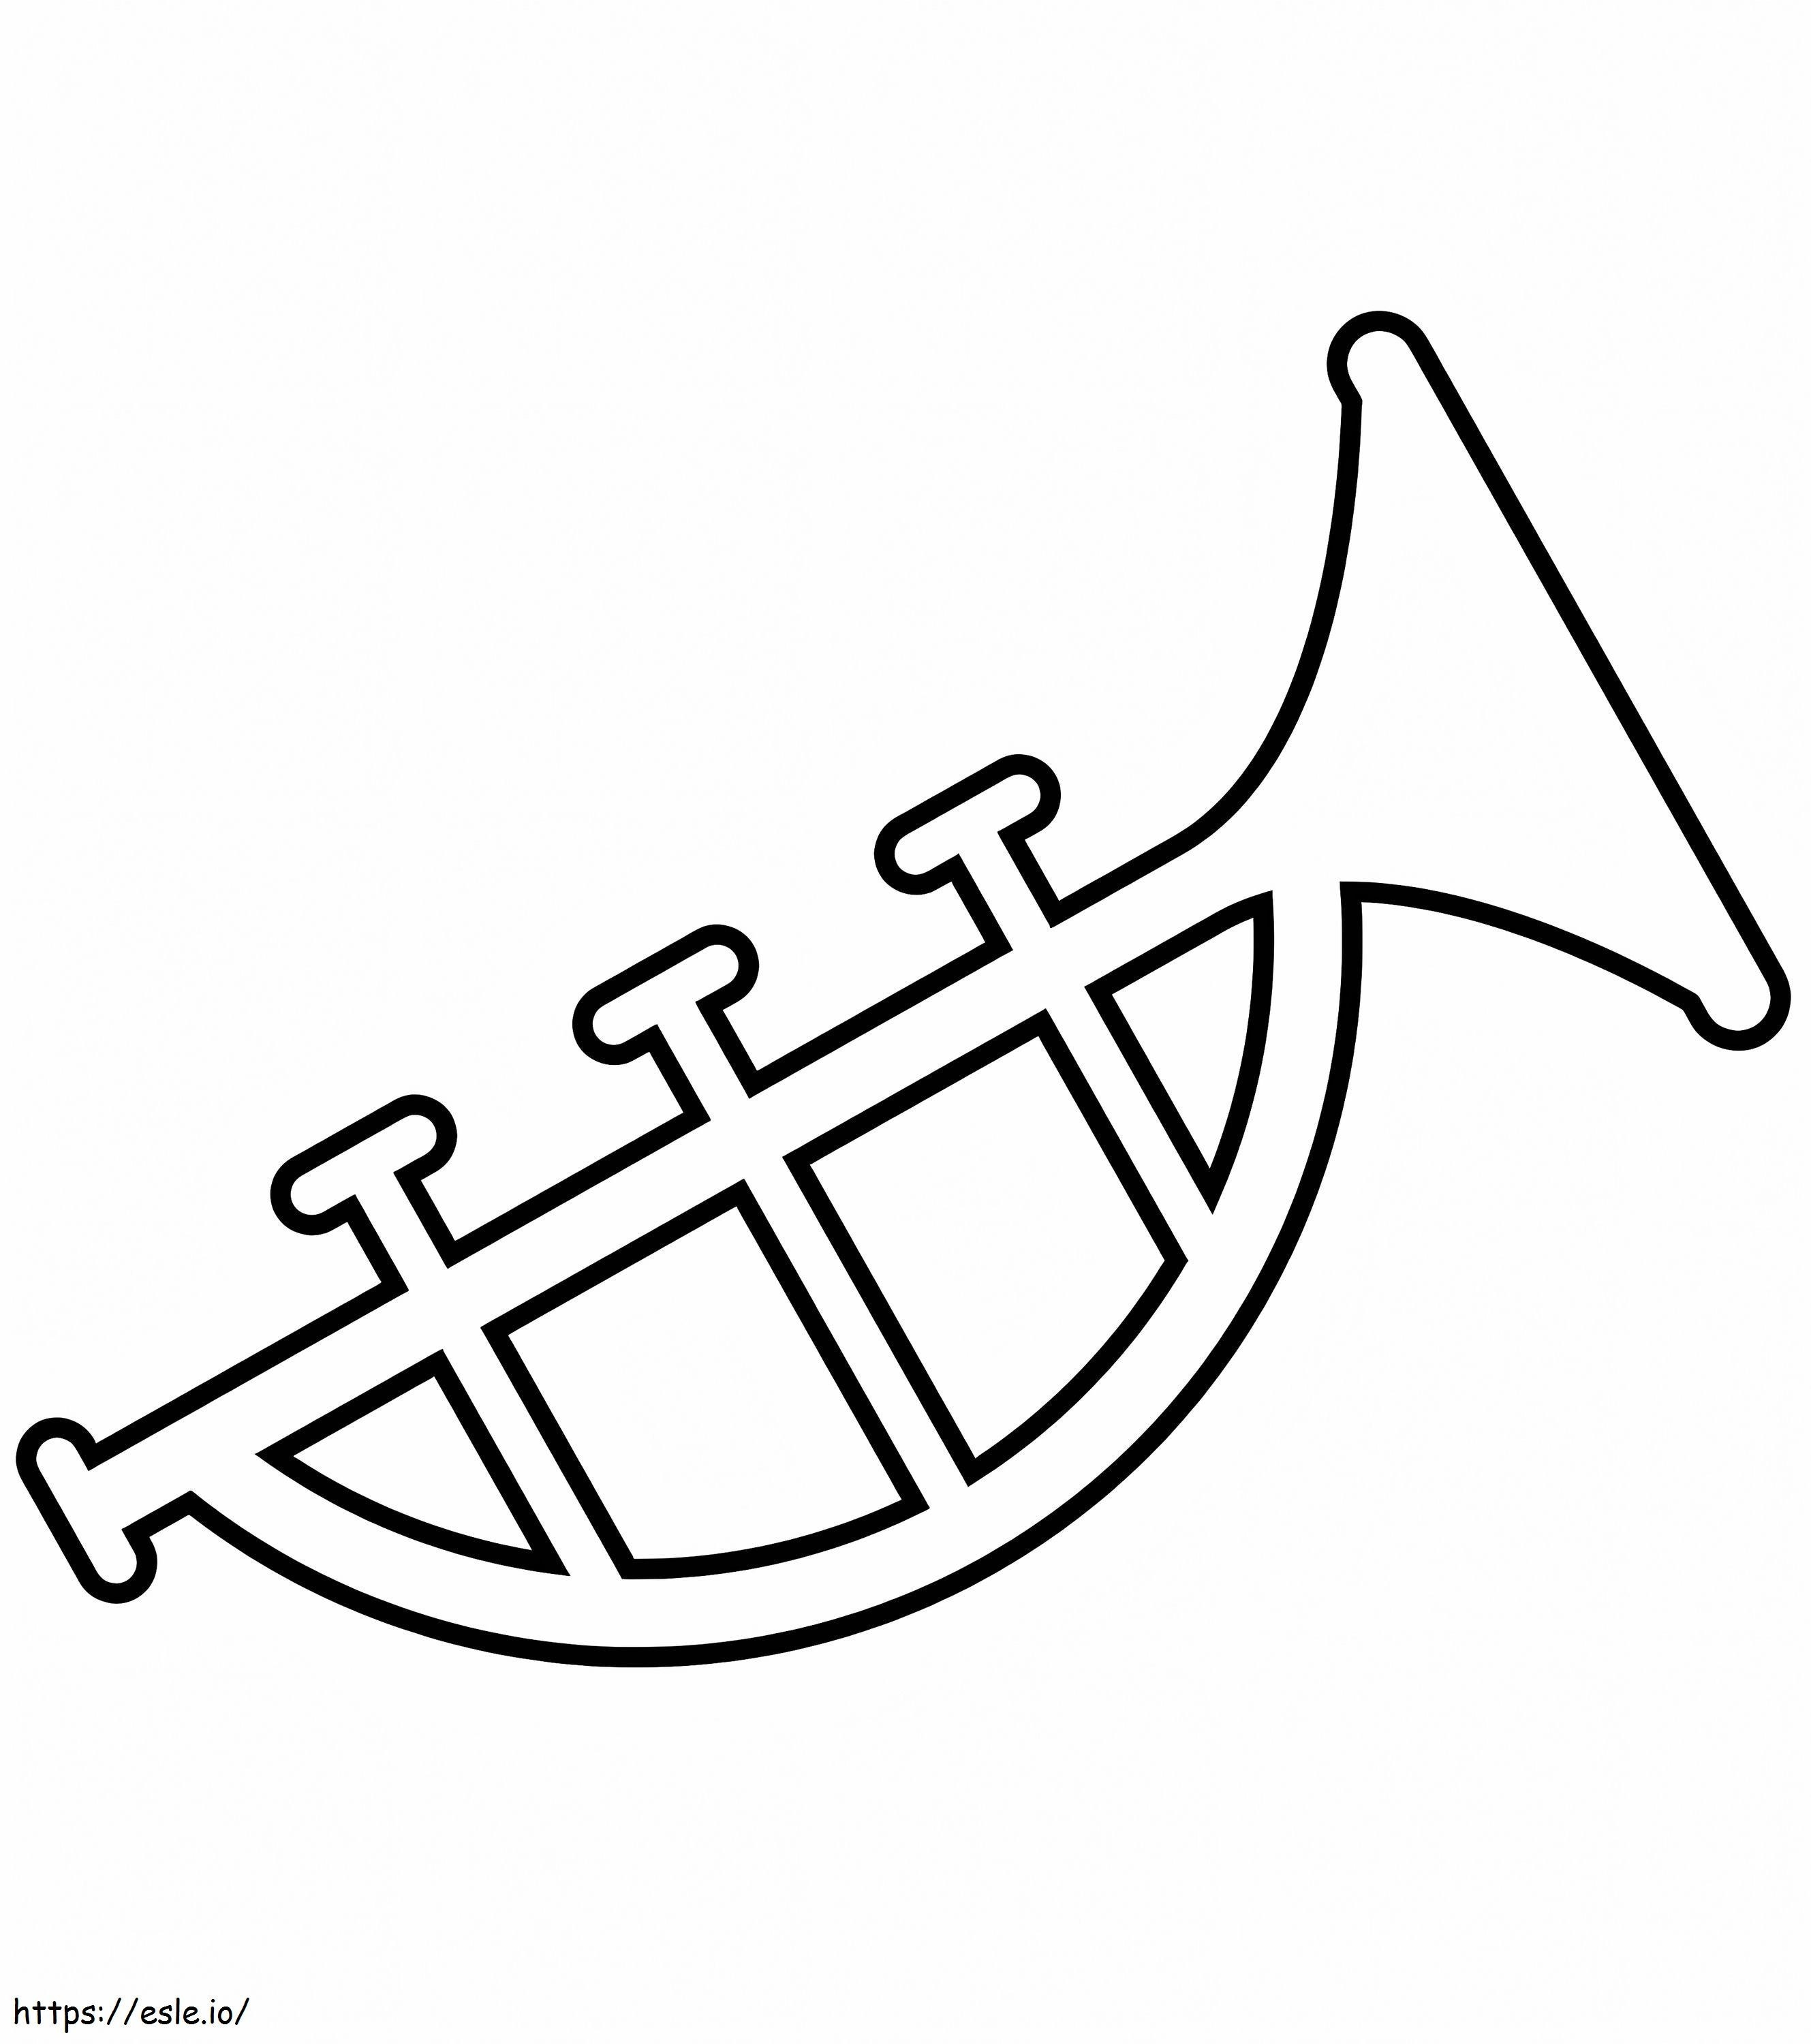 Simple Trumpet 4 coloring page